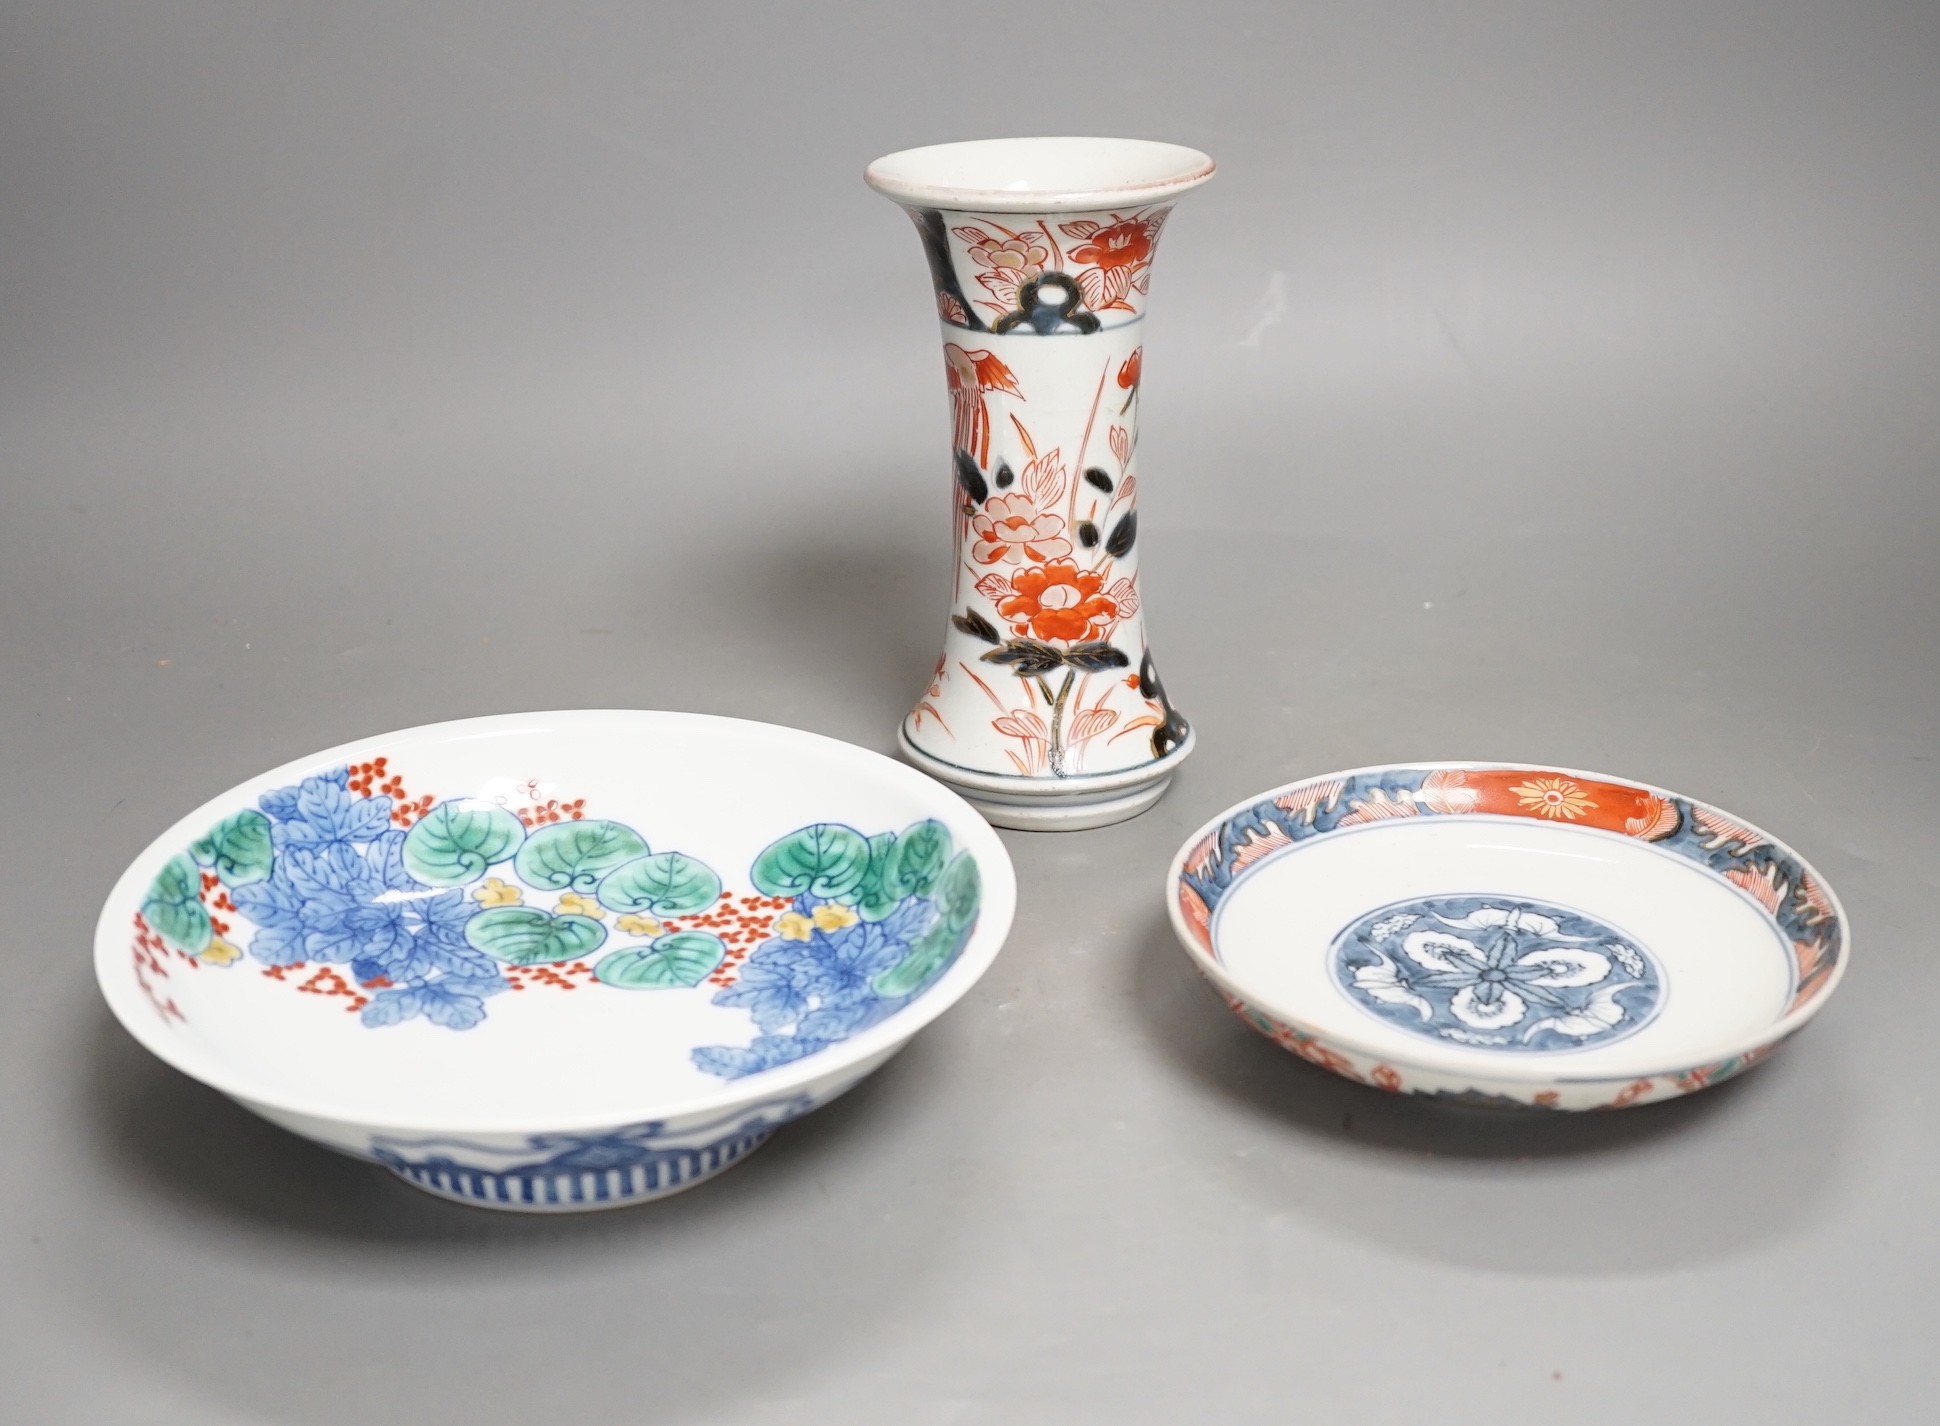 An 18th century Japanese Arita porcelain vase, a Nabeshima style dish and an Arita dish, height of